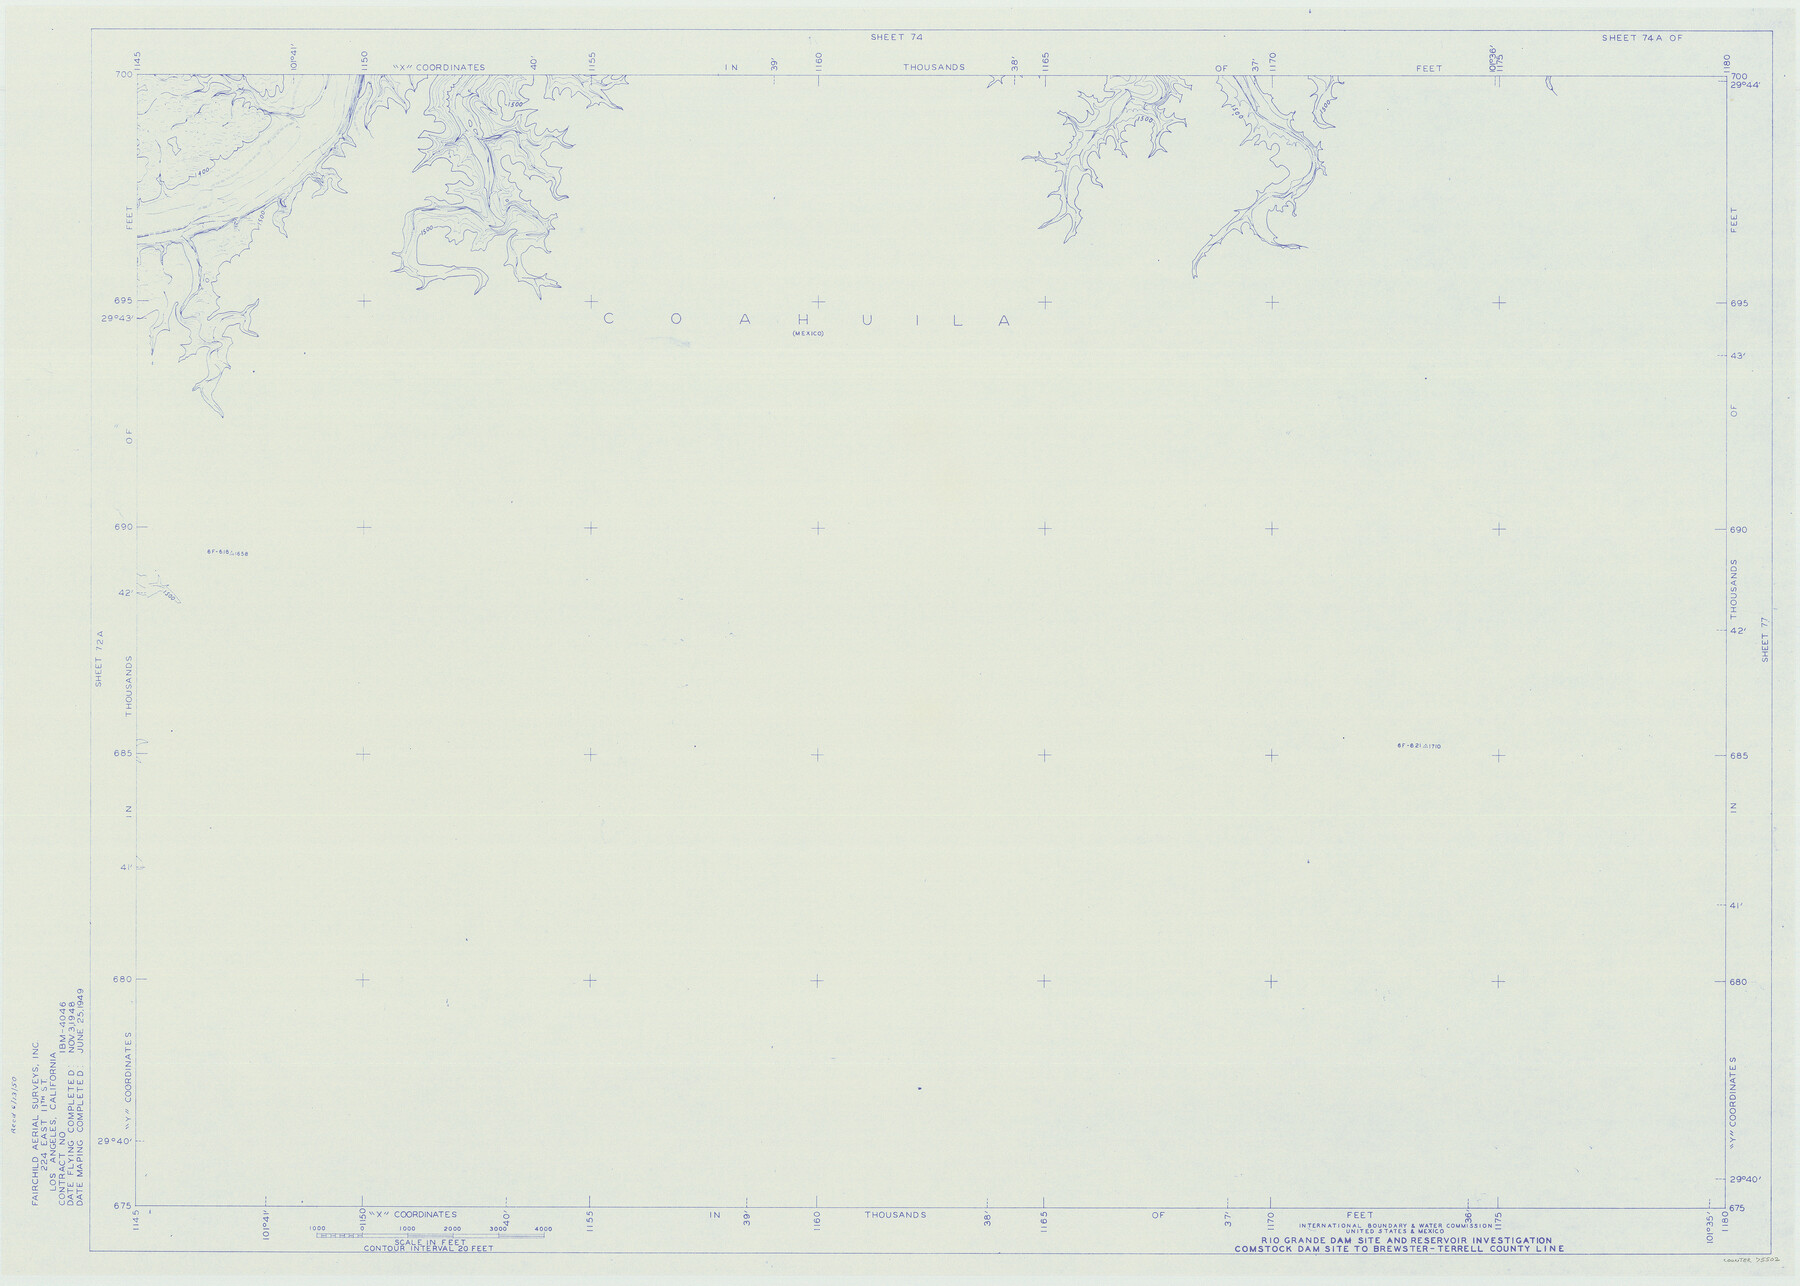 75502, Amistad International Reservoir on Rio Grande 74a, General Map Collection